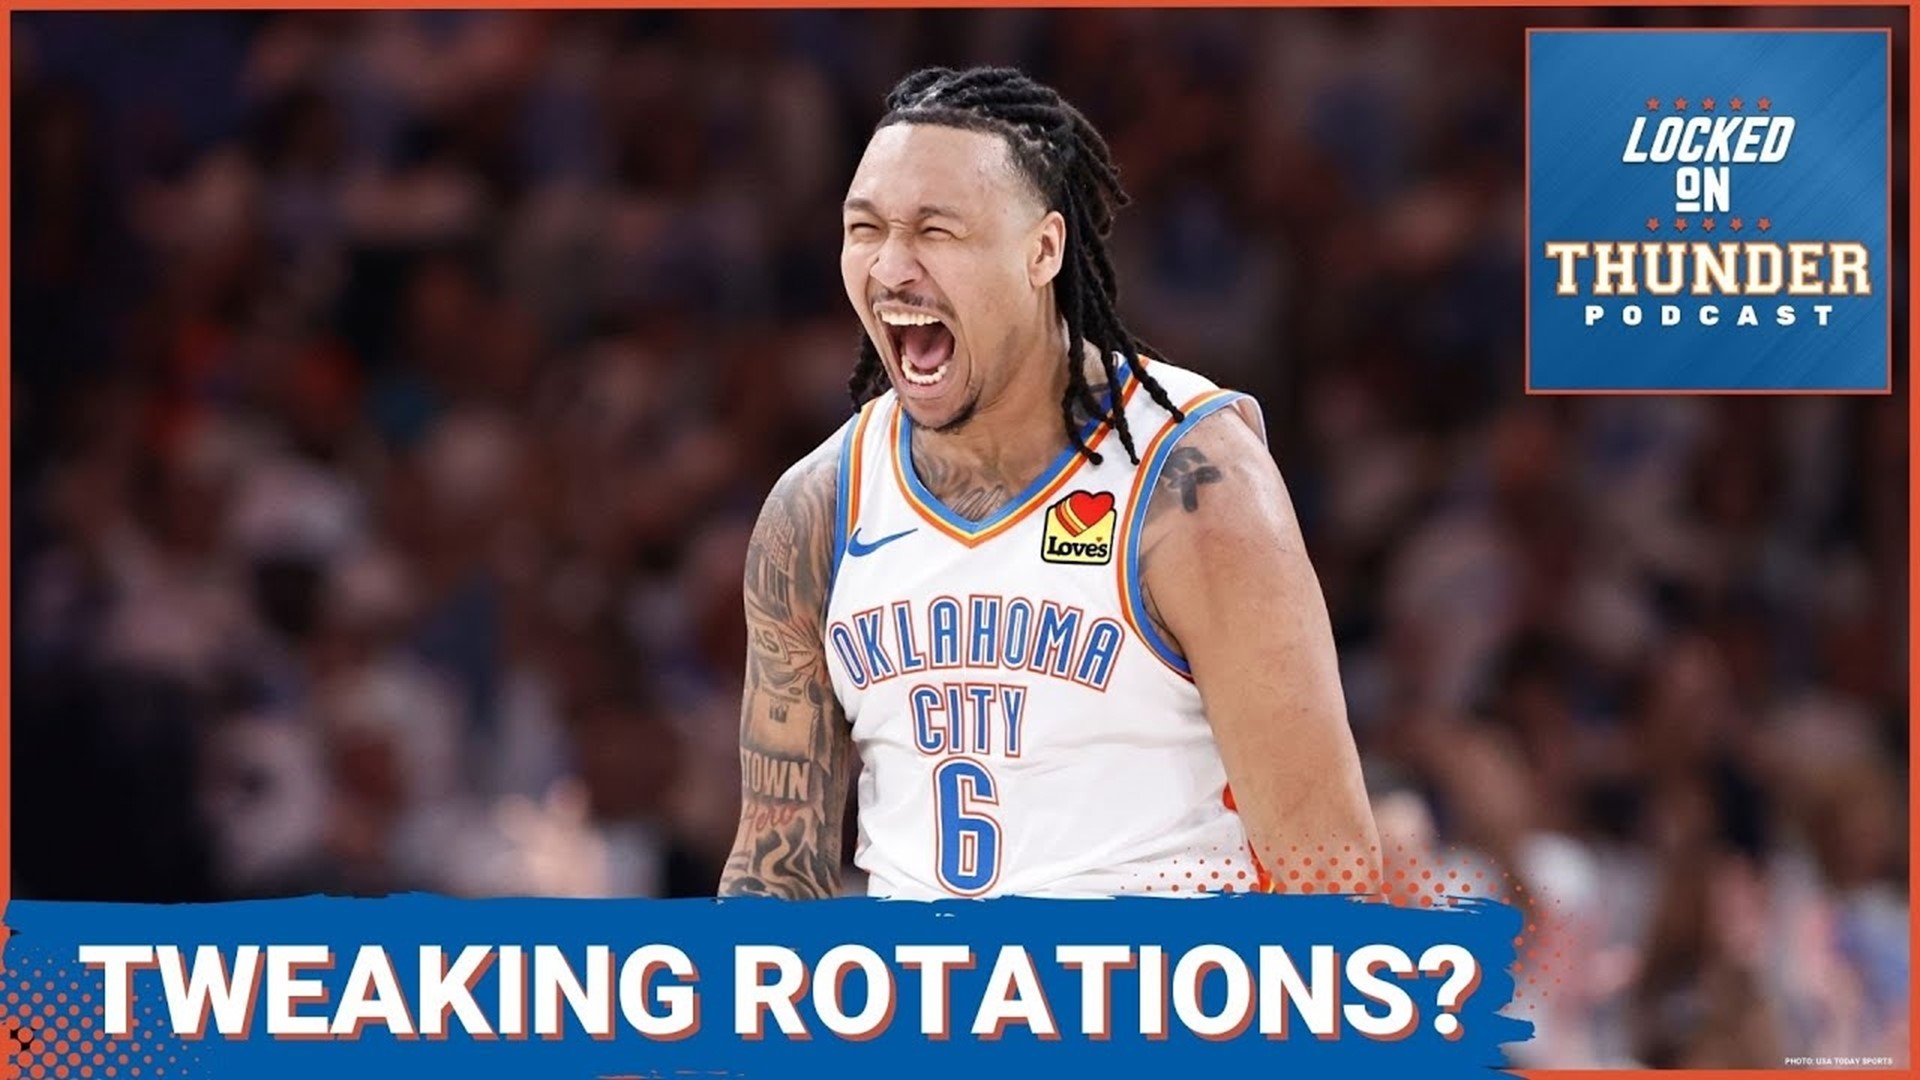 The Oklahoma City Thunder edged the New Orleans Pelicans in Game 1 of their First Round NBA Playoff series. Should the OKC Thunder tweak their rotations?